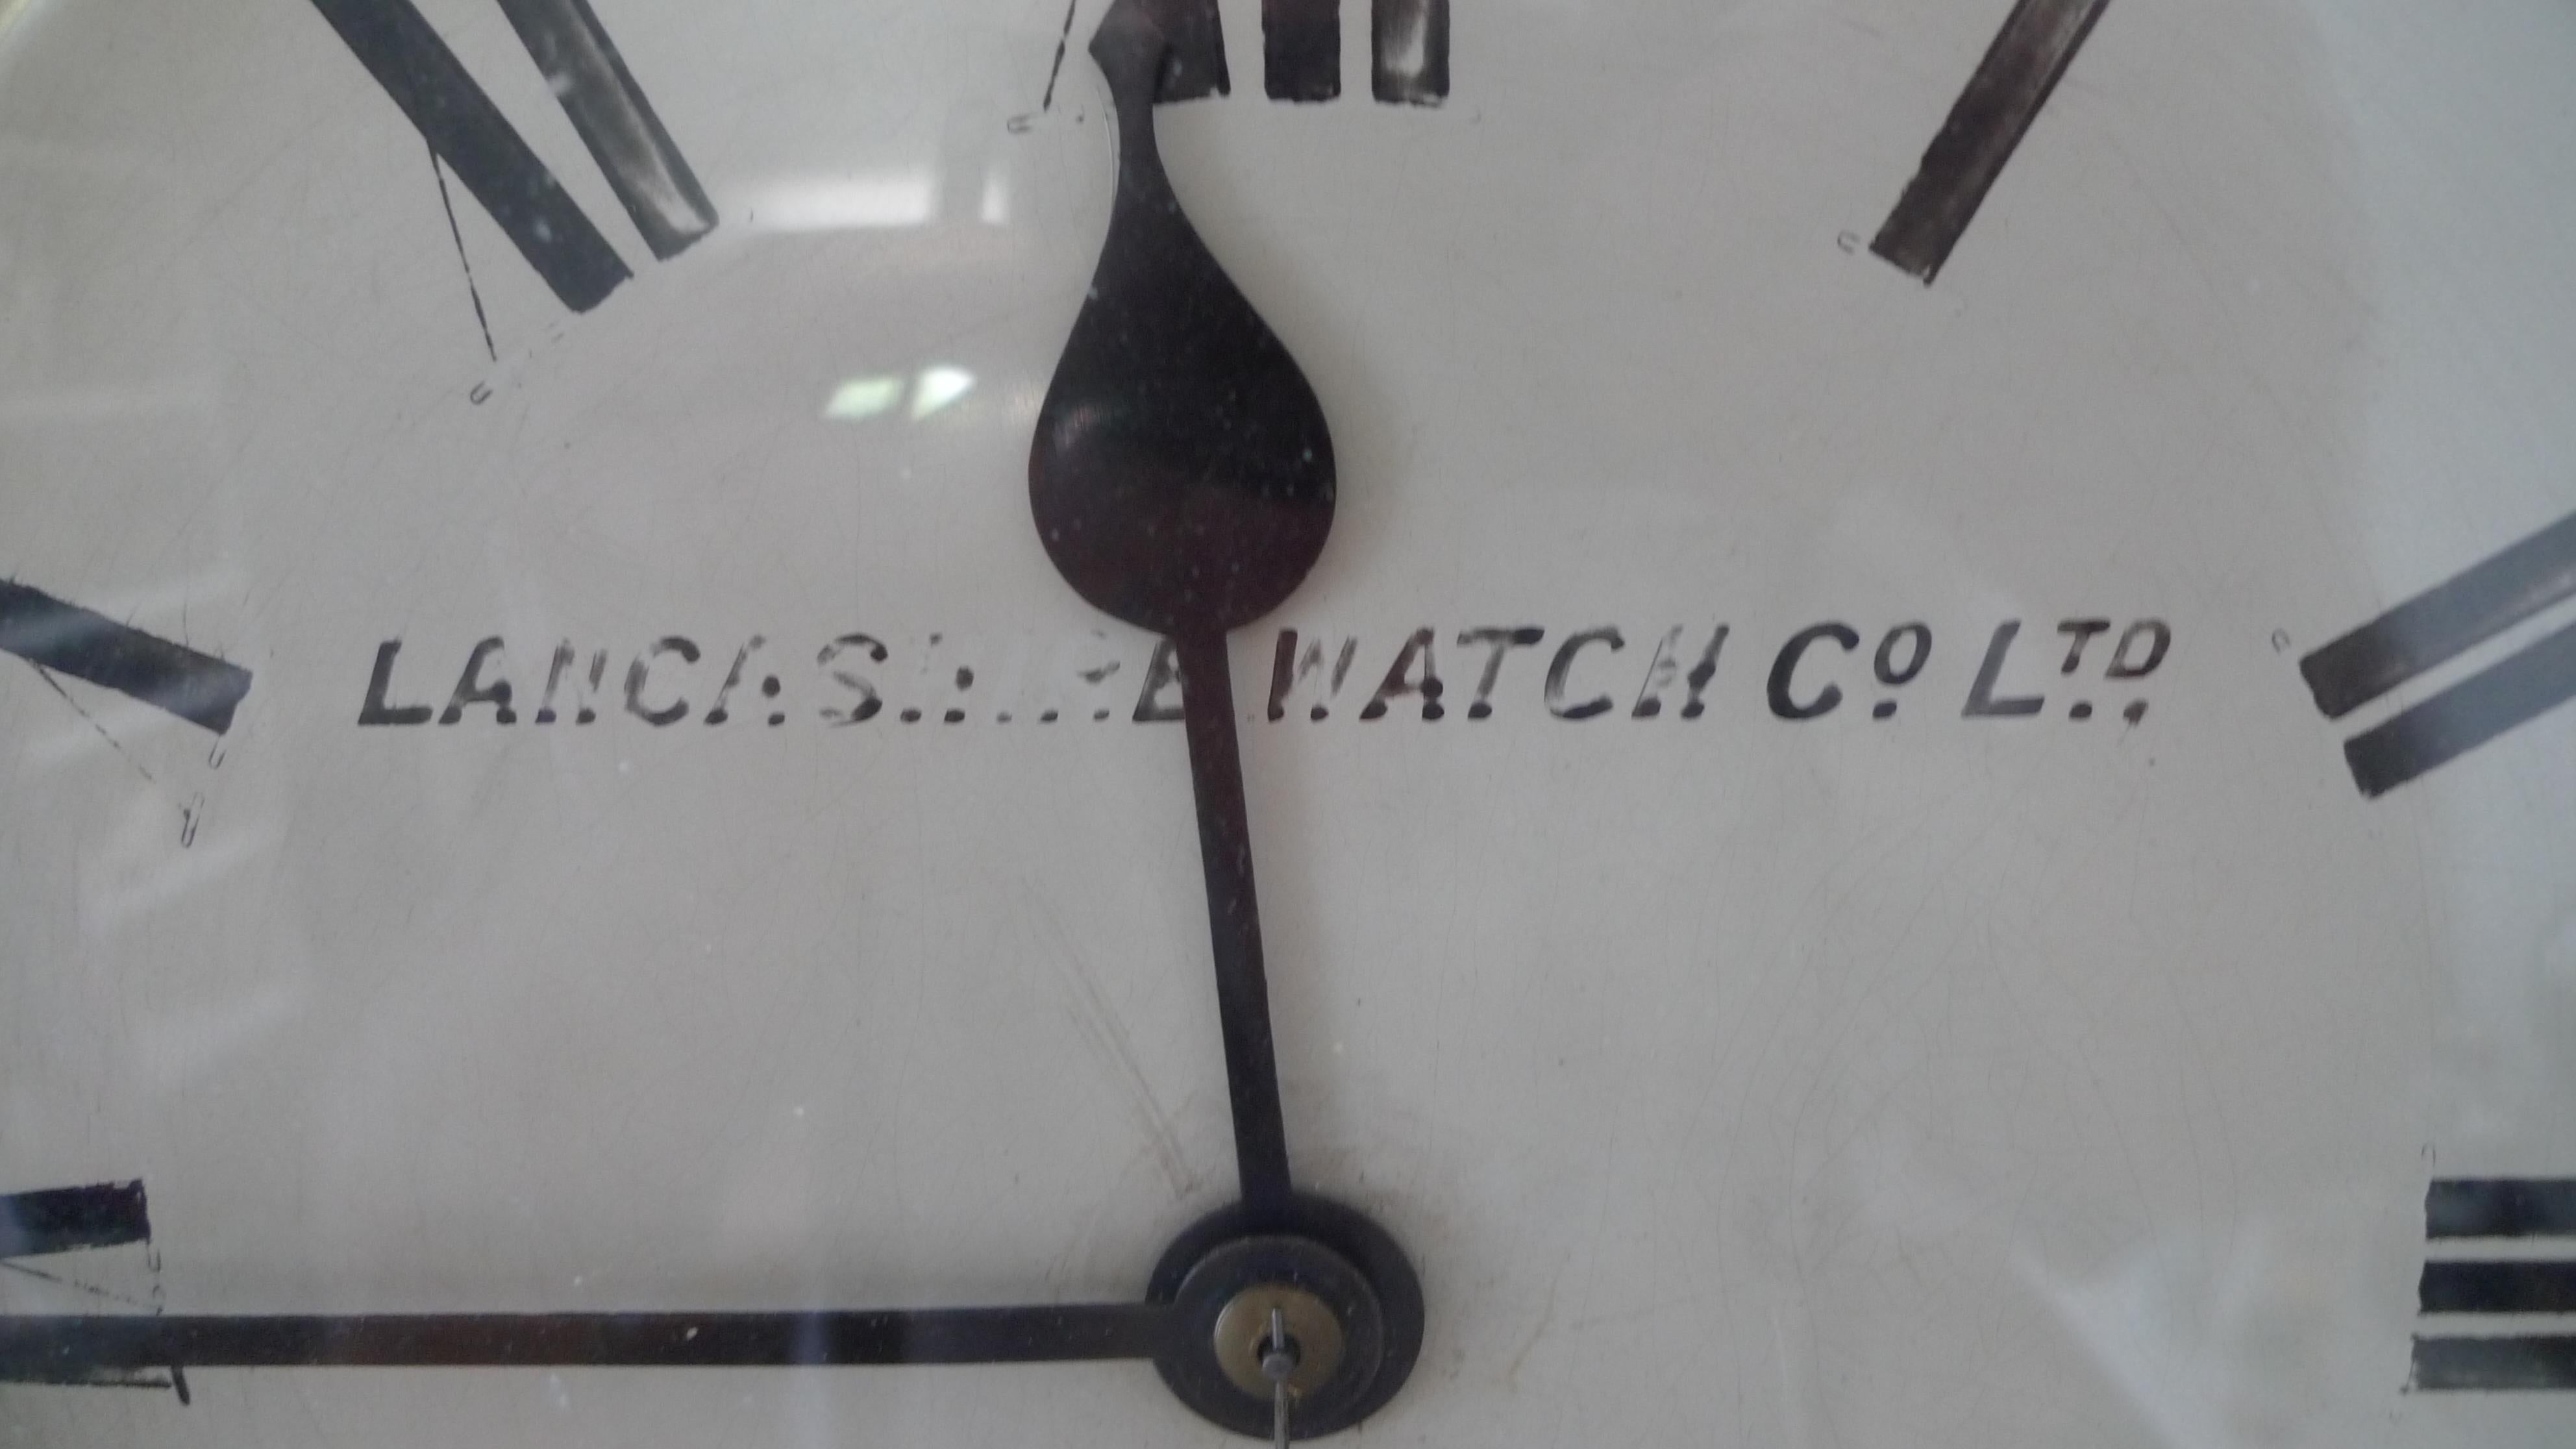 English Wall clock by Lancashire Watch Co. from rail station, late 19th cent. Ships free For Sale